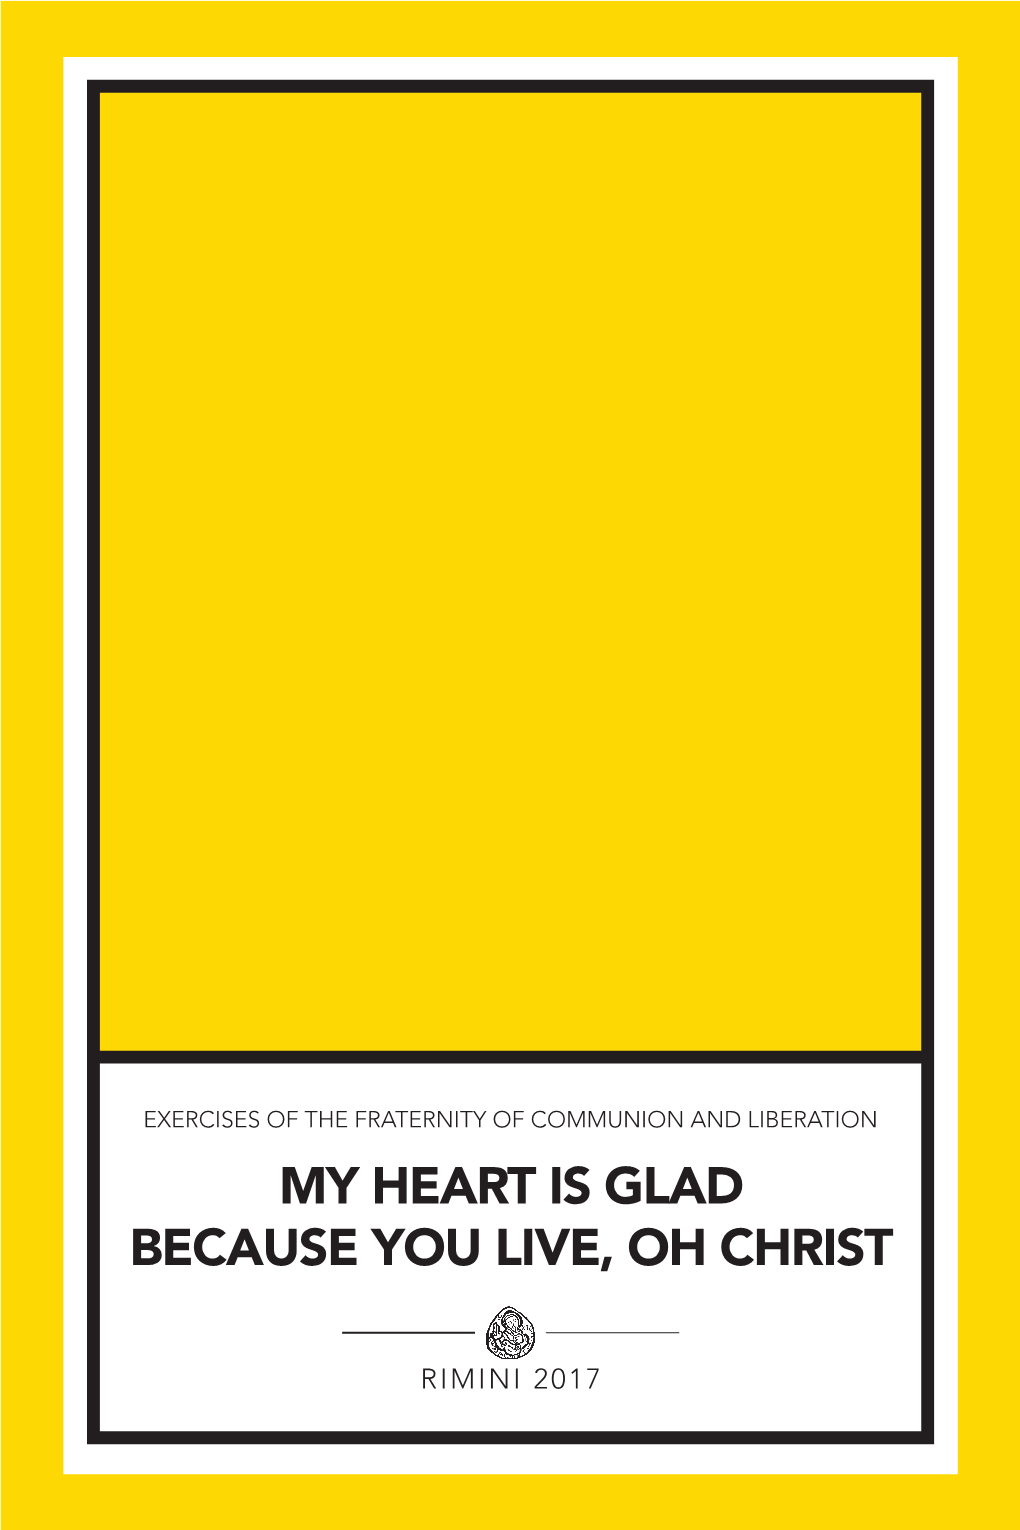 My Heart Is Glad Because You Live, Oh Christ